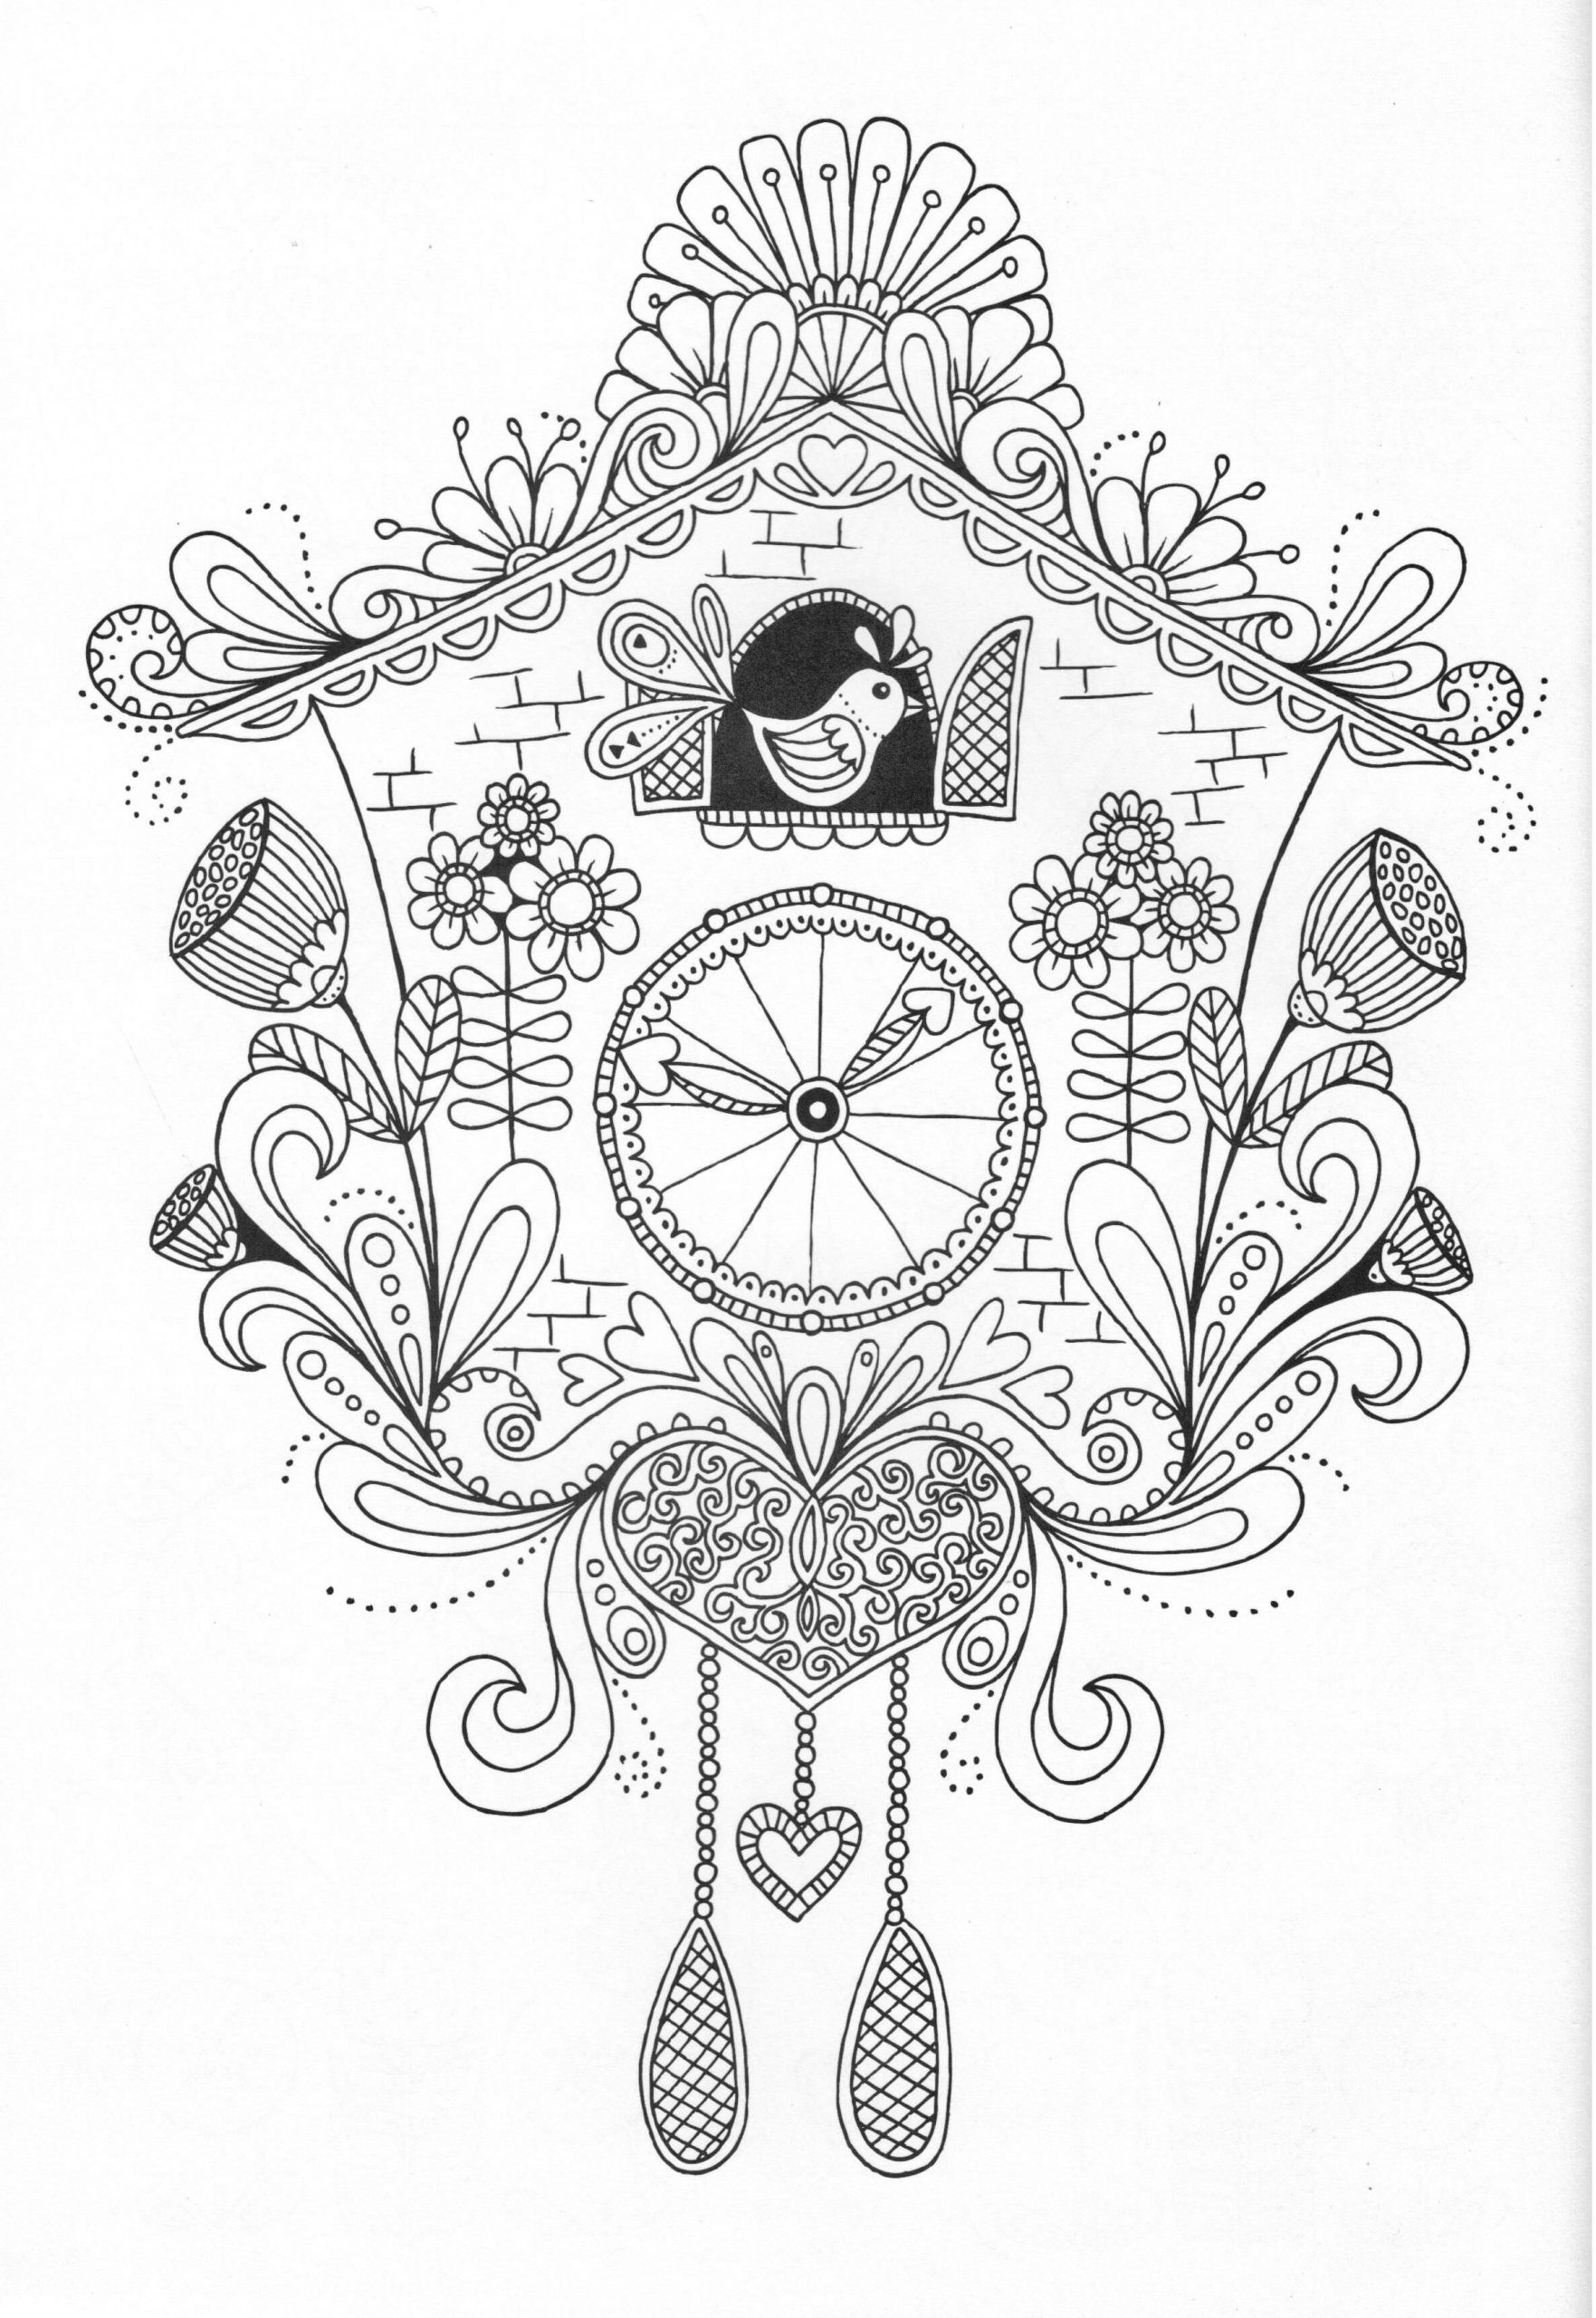 Large Coloring Pages For Adults
 Pin by DeAnna Lea on Raven s Grown Up Coloring